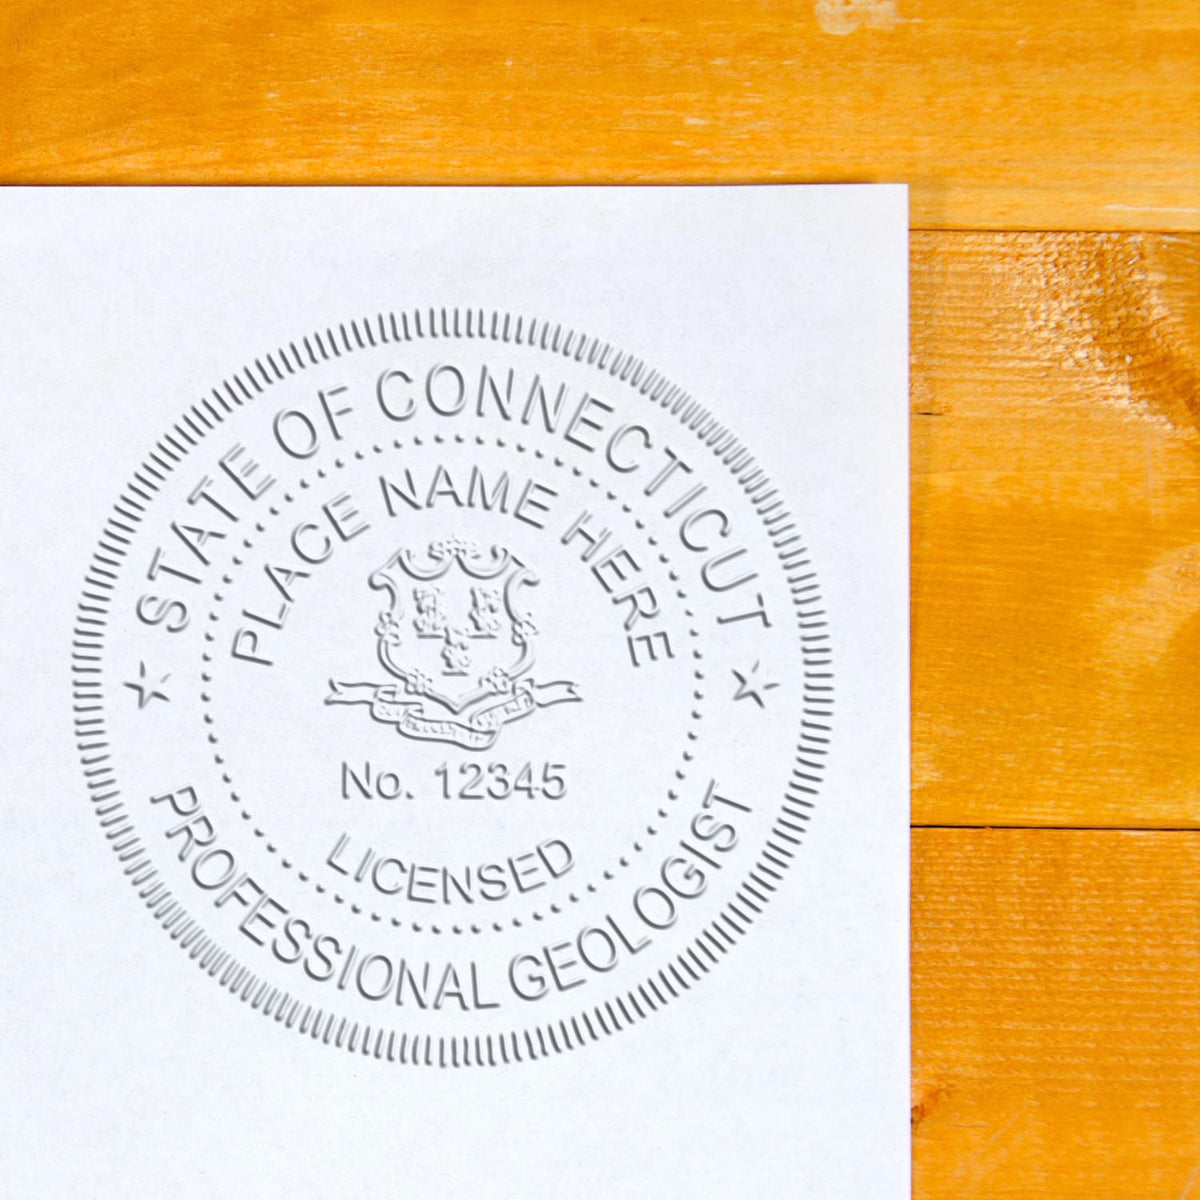 An in use photo of the Connecticut Geologist Desk Seal showing a sample imprint on a cardstock